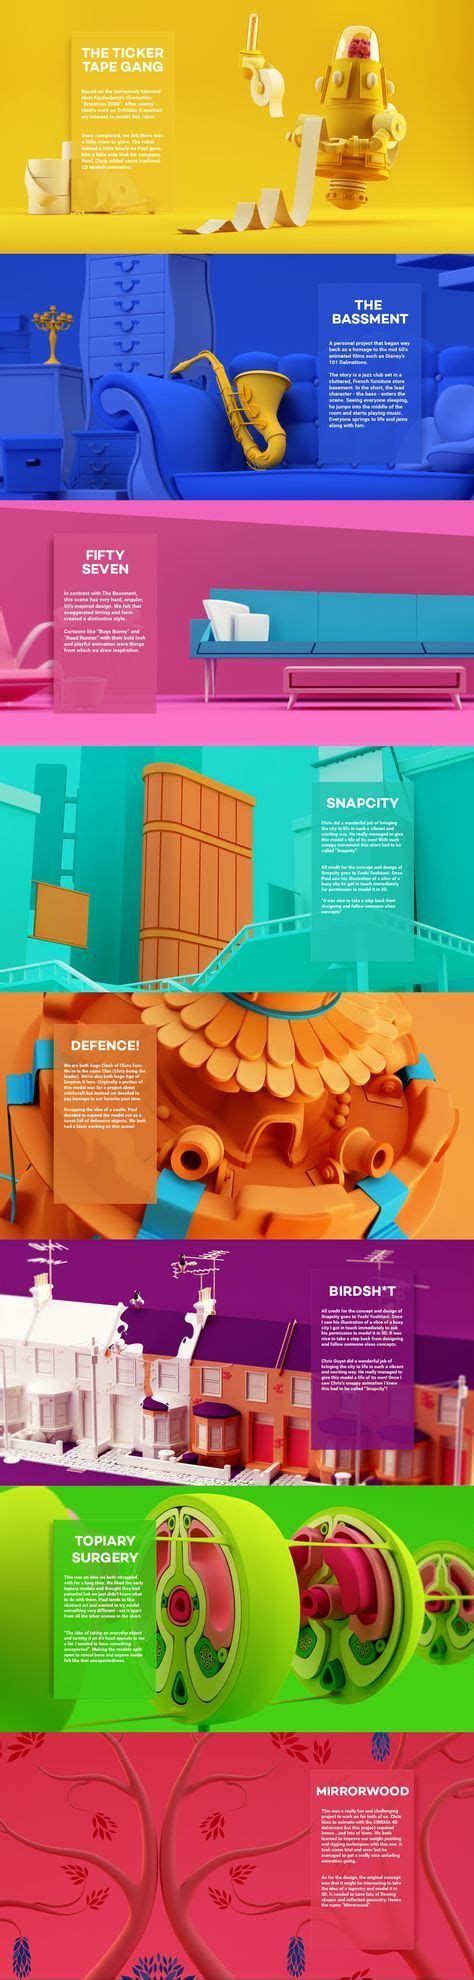 Check Out This Behance Project All The Things Behance